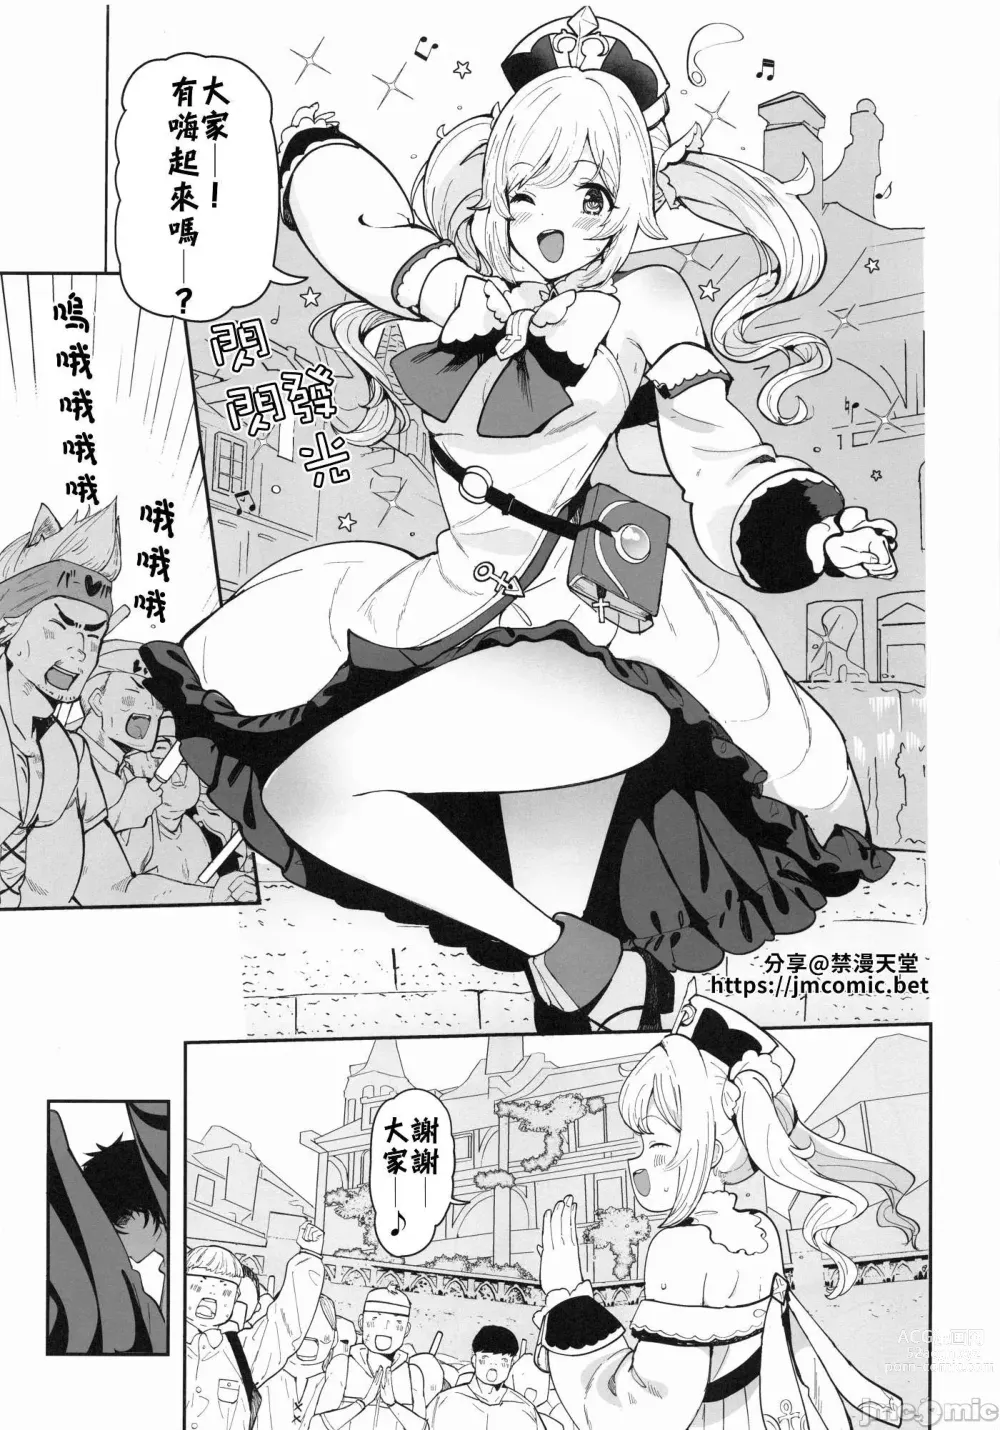 Page 2 of doujinshi 芭芭拉 入眠